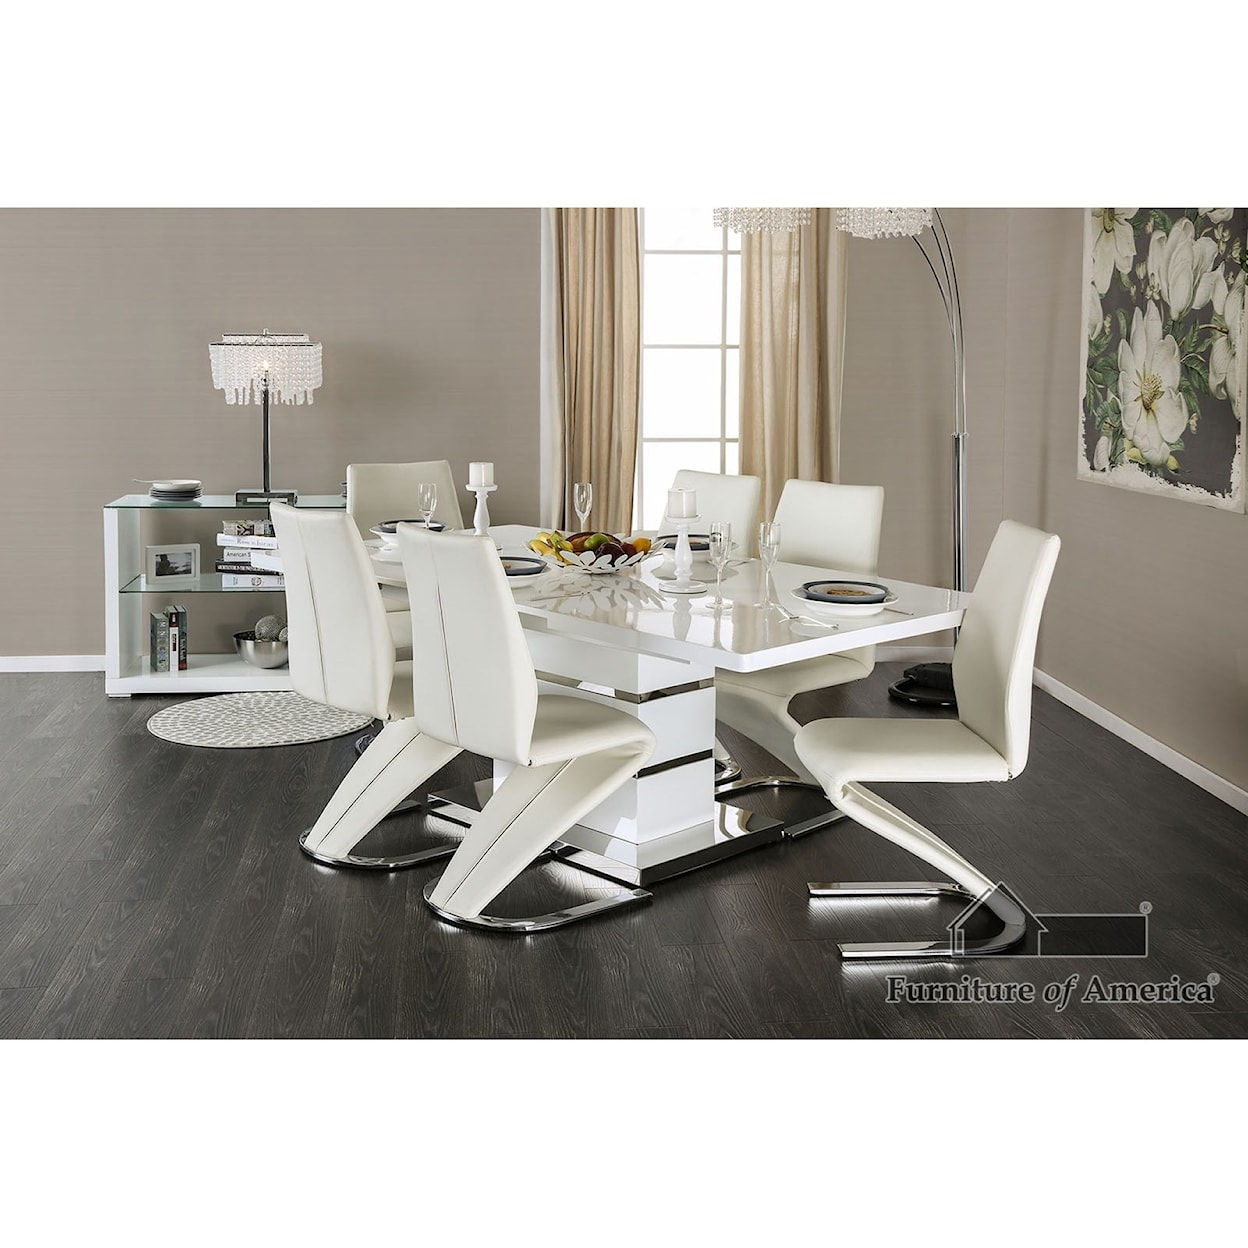 Furniture of America Midvale Dining Table